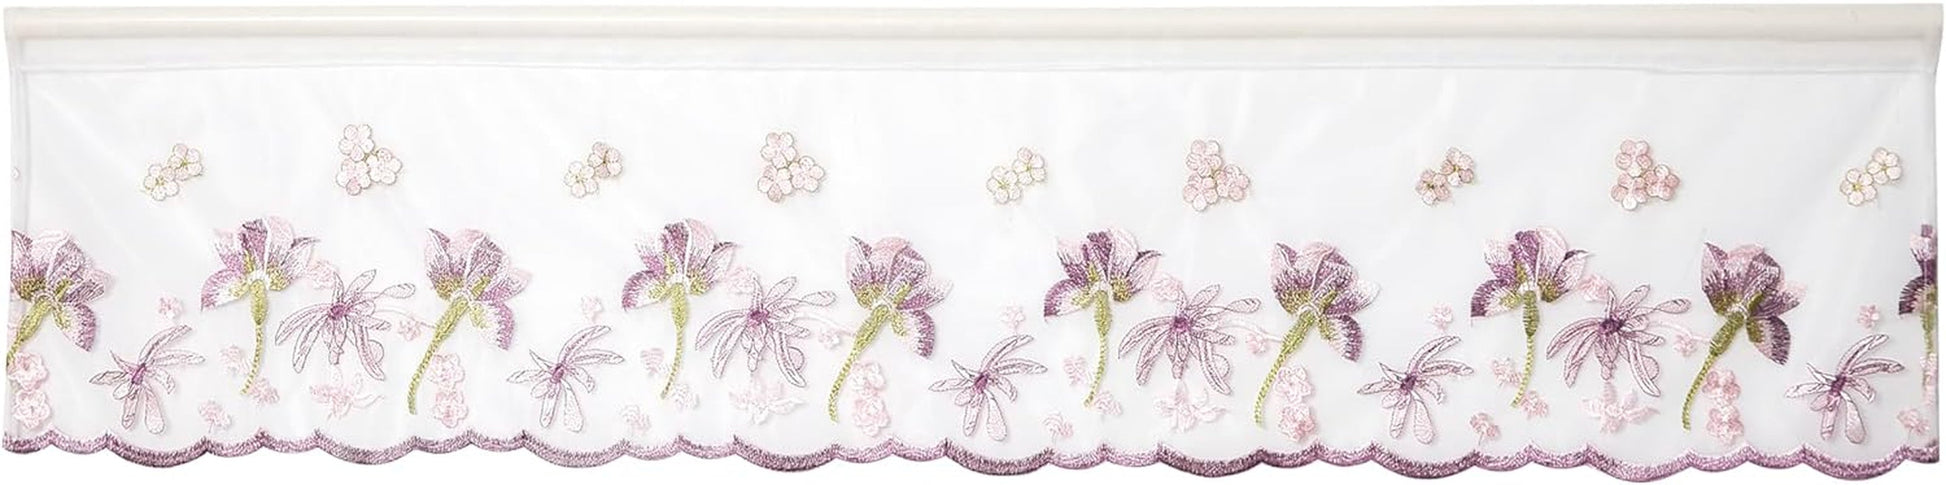 Violet Linen Riviera Floral Lace Pattern, Polyester, Semi Sheer Embroidered Lace, Lilac, 60 Inch X 18 Inch, Straight, Decorative Window Treatment Rod Pocket Curtain Straight Valance